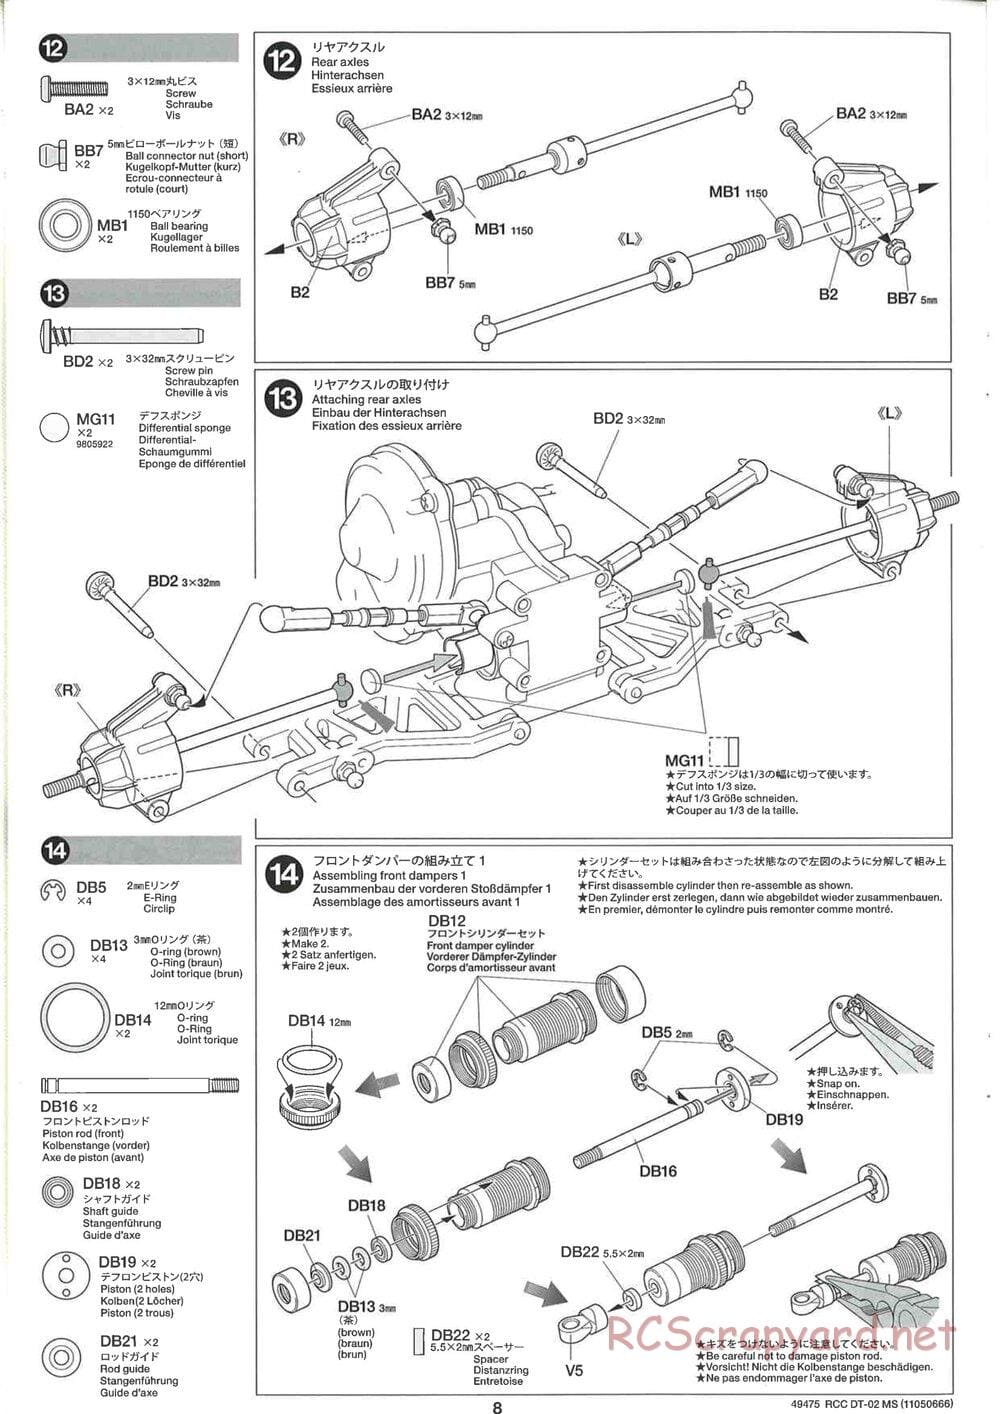 Tamiya - DT-02 MS Chassis - Manual - Page 9